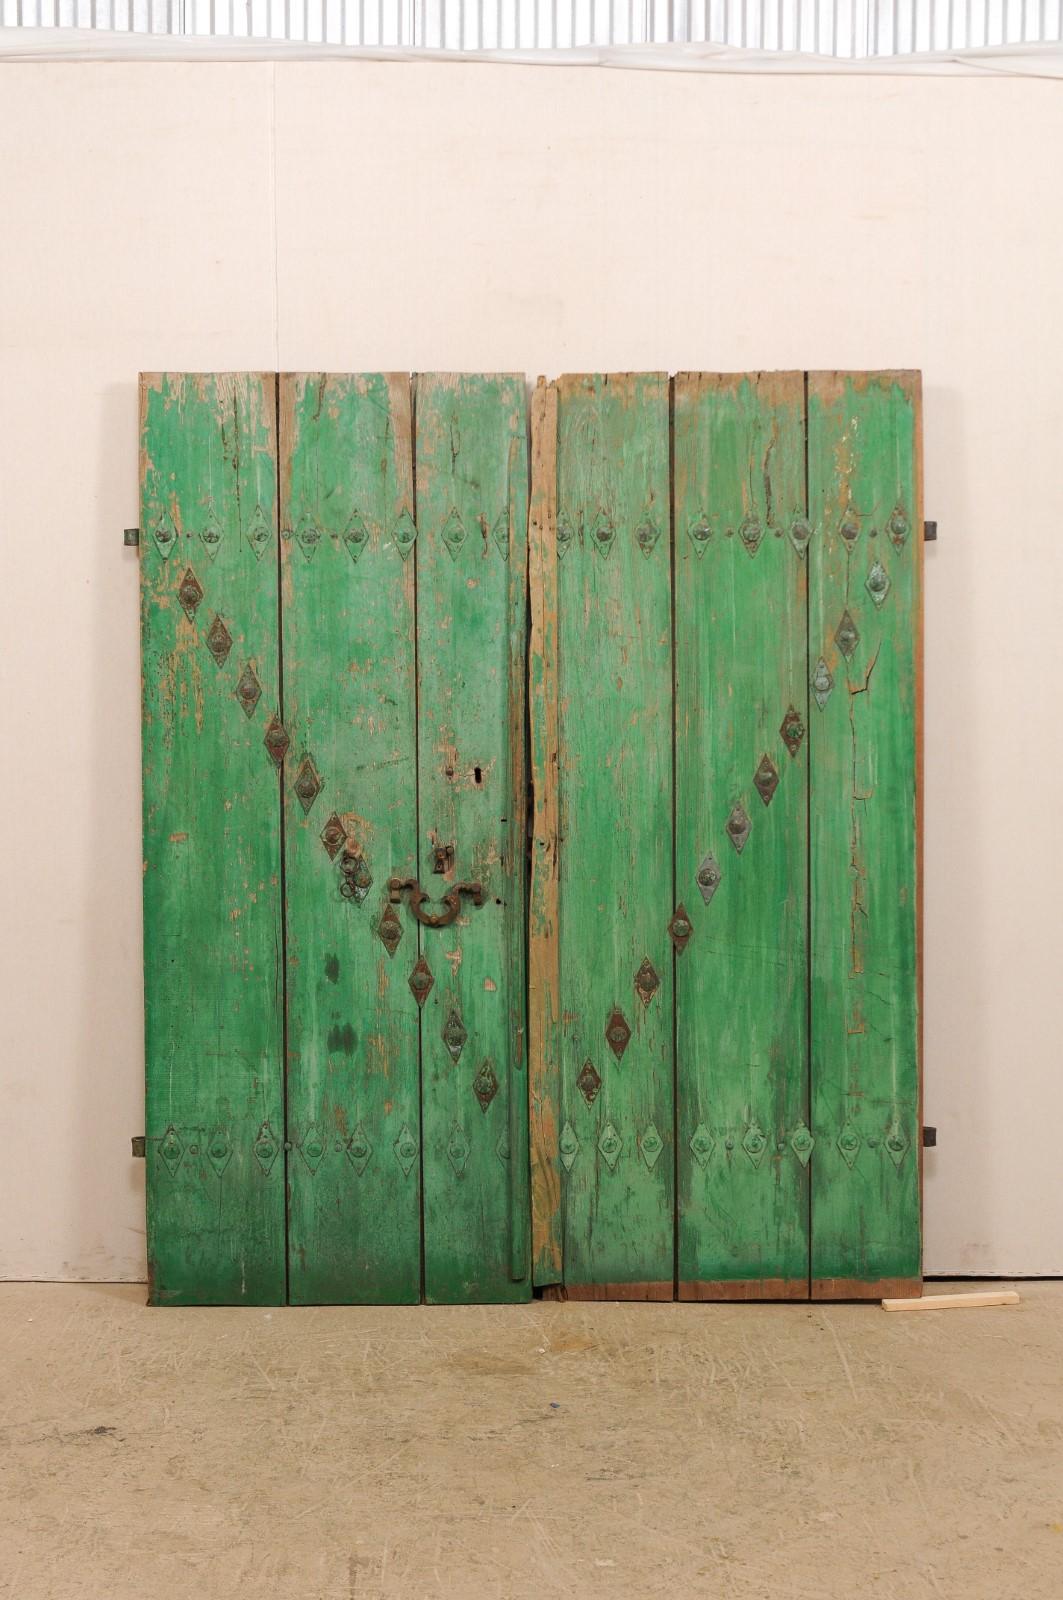 A pair of Spanish carved wood doors from the early 19th century. This pair of antique doors from Spain each feature three vertically positioned boards with old green paint and a geometric pattern of forged iron hardware and diamond-shaped rivets